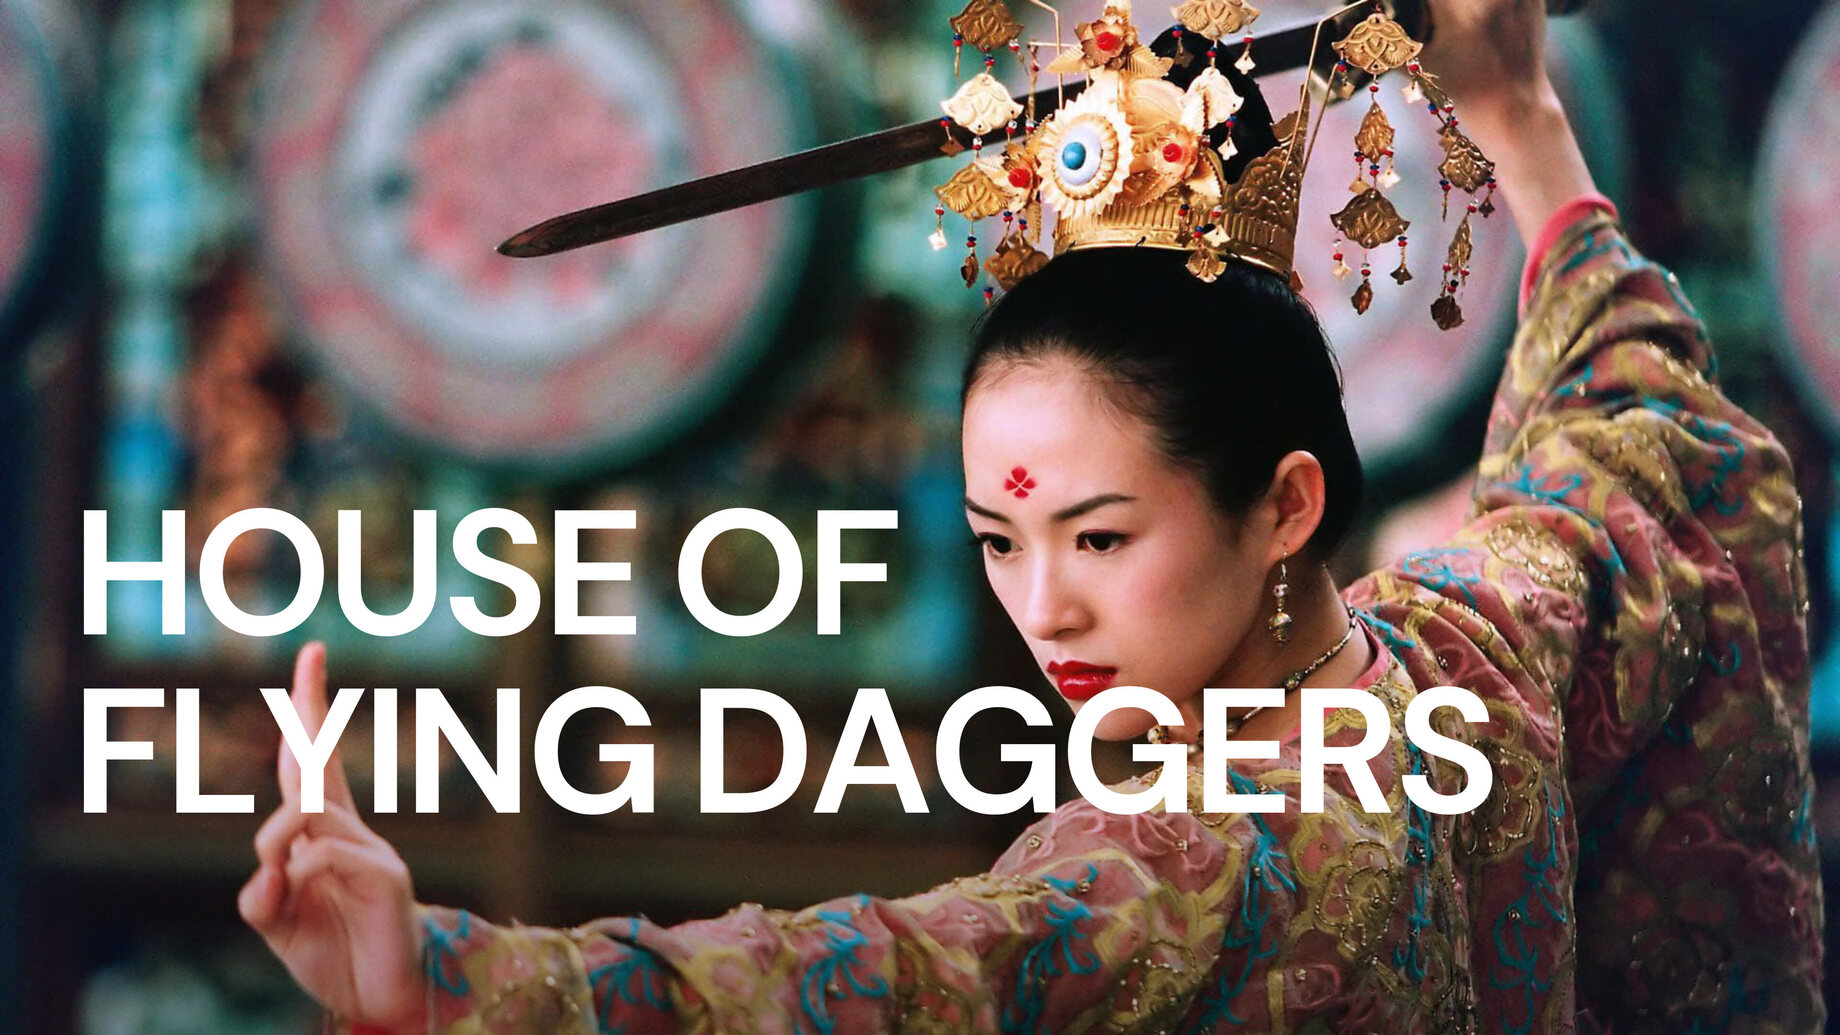 35-facts-about-the-movie-house-of-flying-daggers